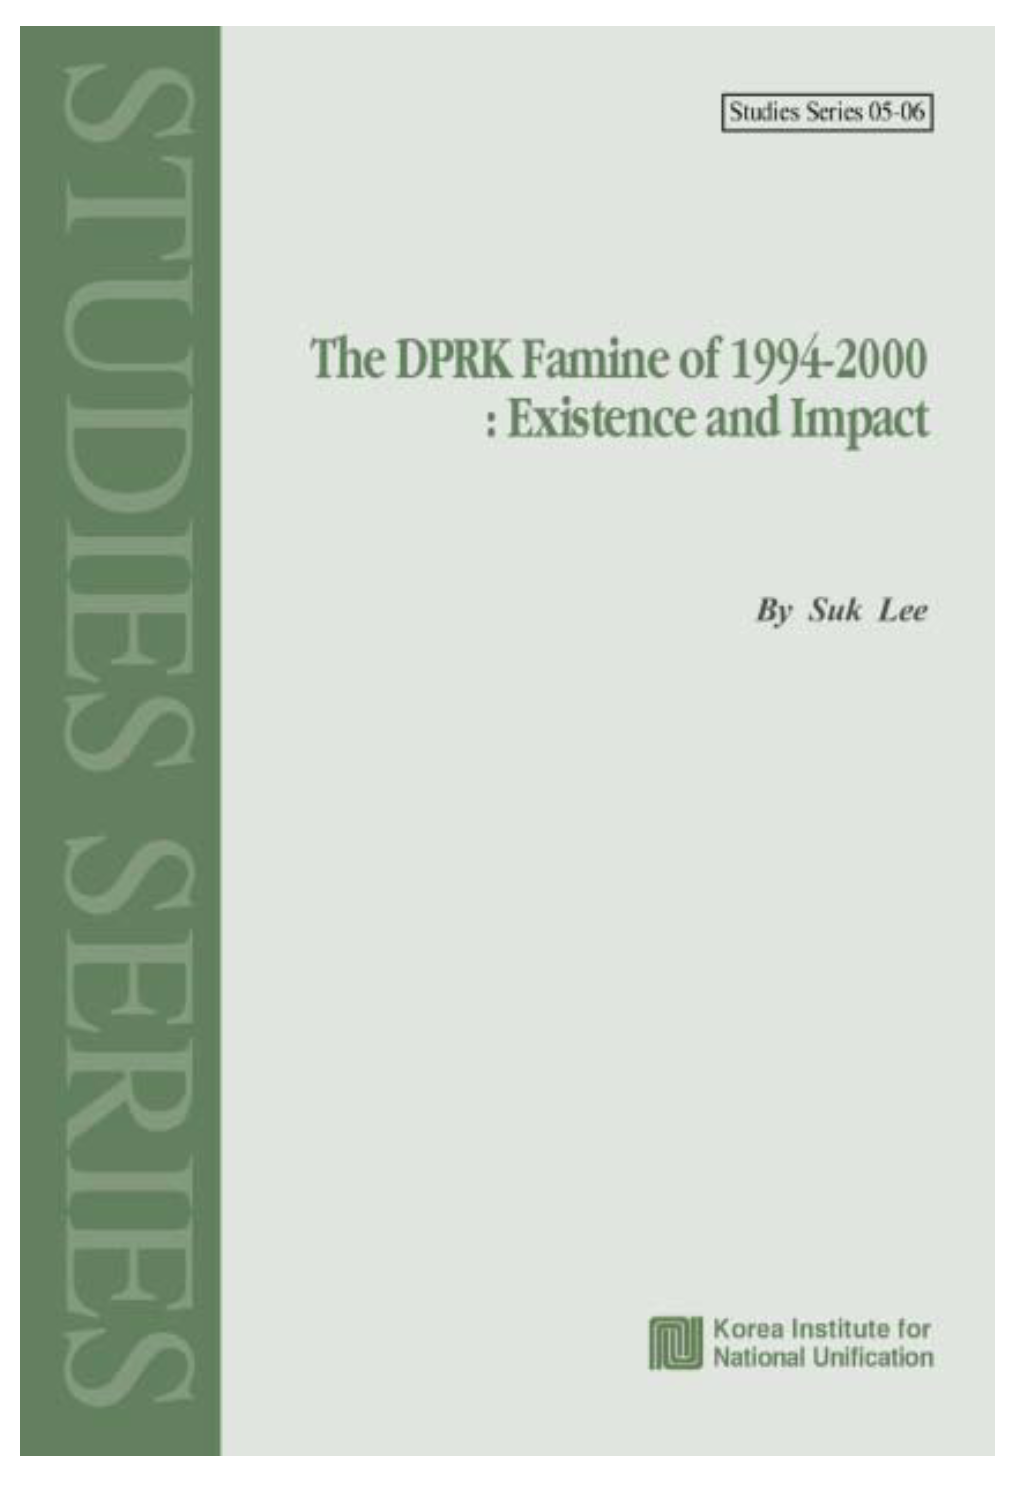 The DPRK Famine of 1994-2000 : Existence and Impact the DPRK Famine of 1994-2000: Existence and Impact